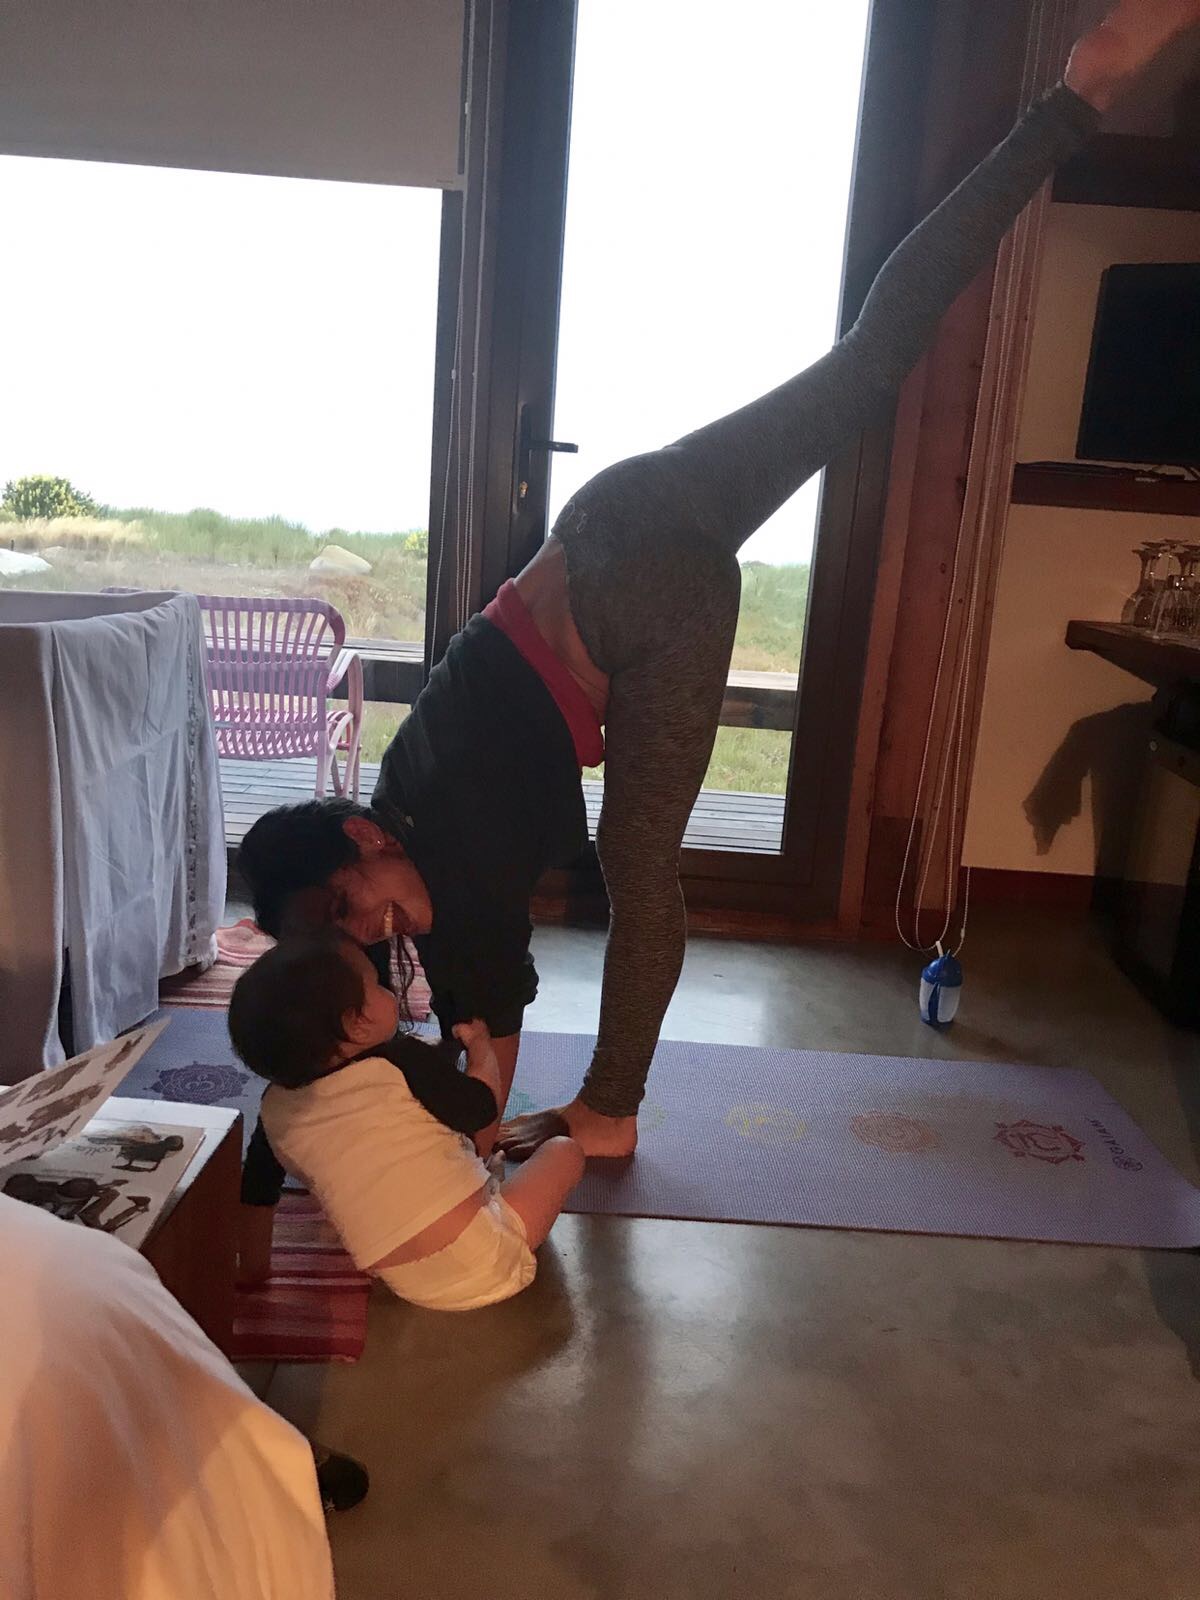 Picture of Kimberly doing yoga with Lil Bub playing nearby.